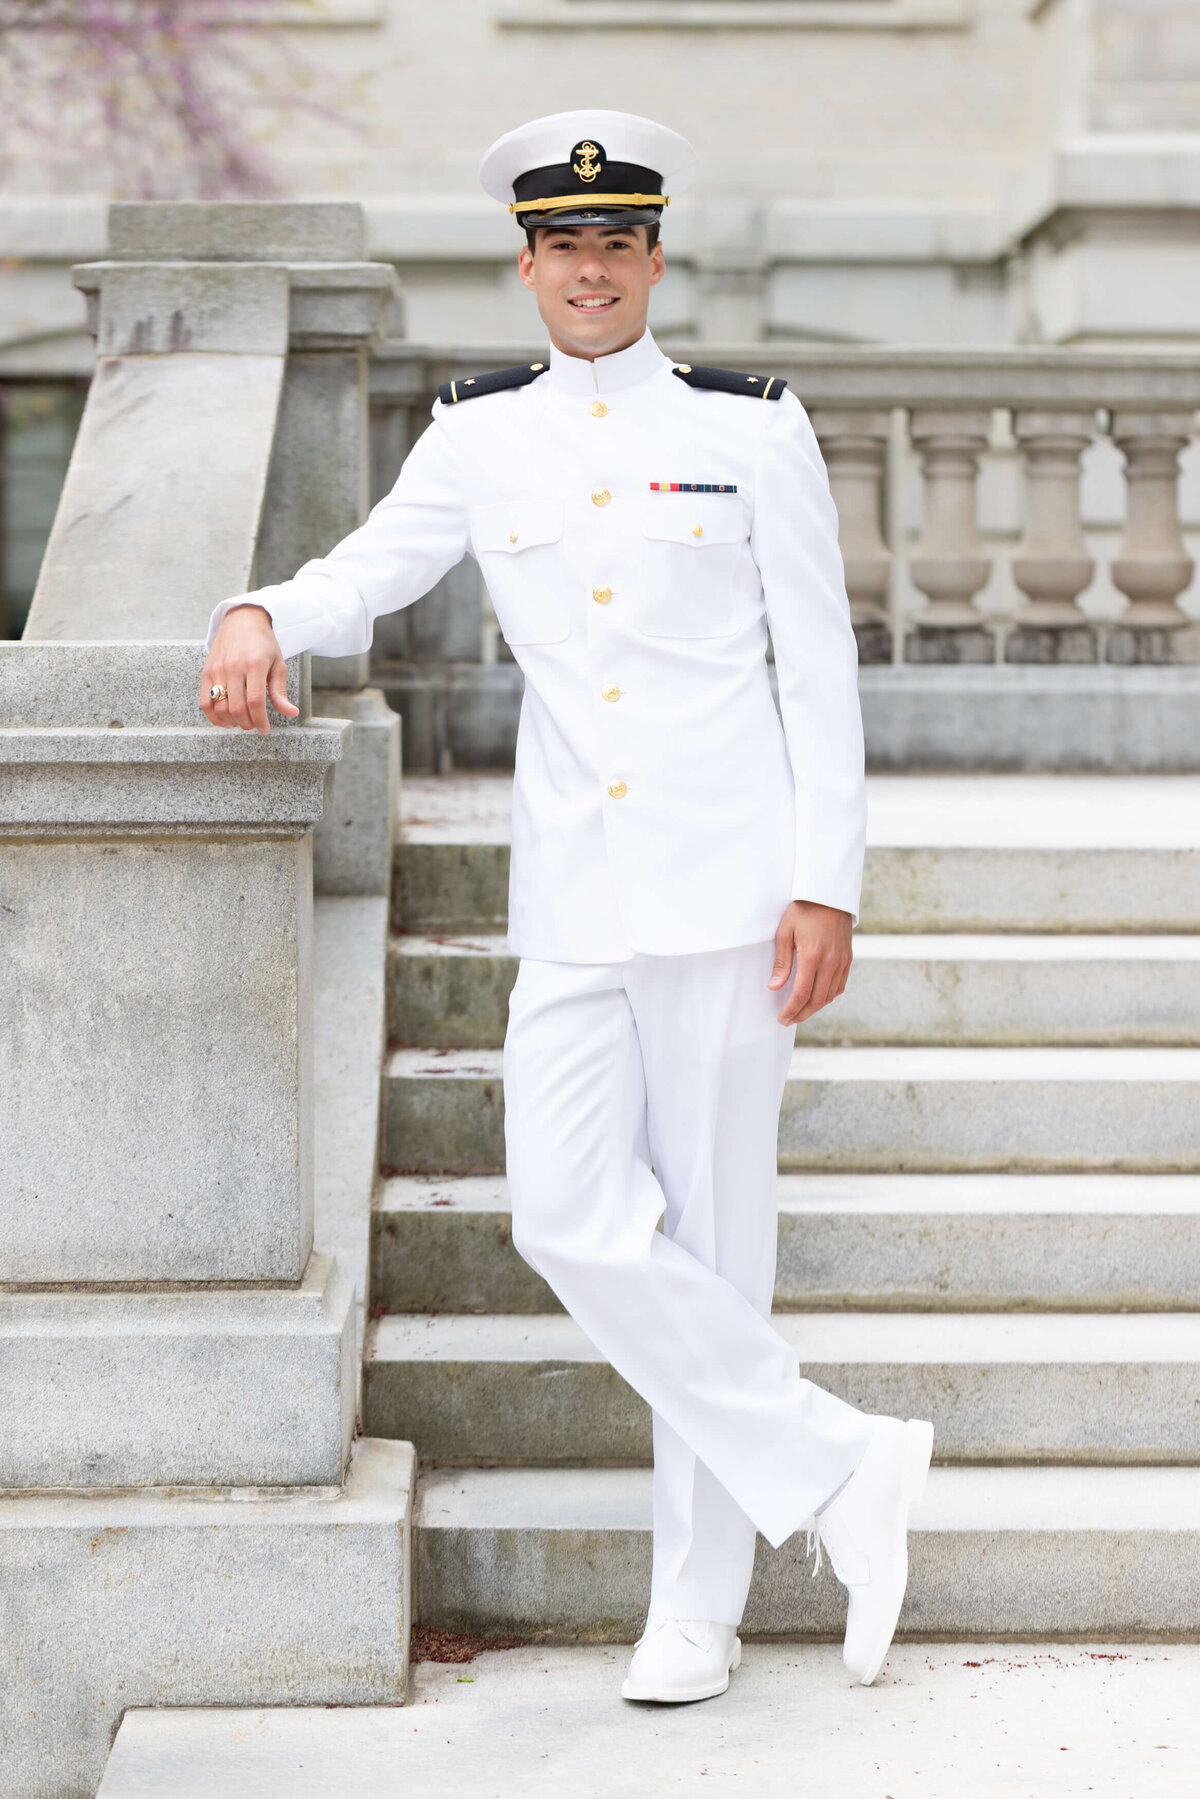 Senior Photo of Sailor in Whites outside Mahan Hall at the Naval Academy in Annapolis, Md.